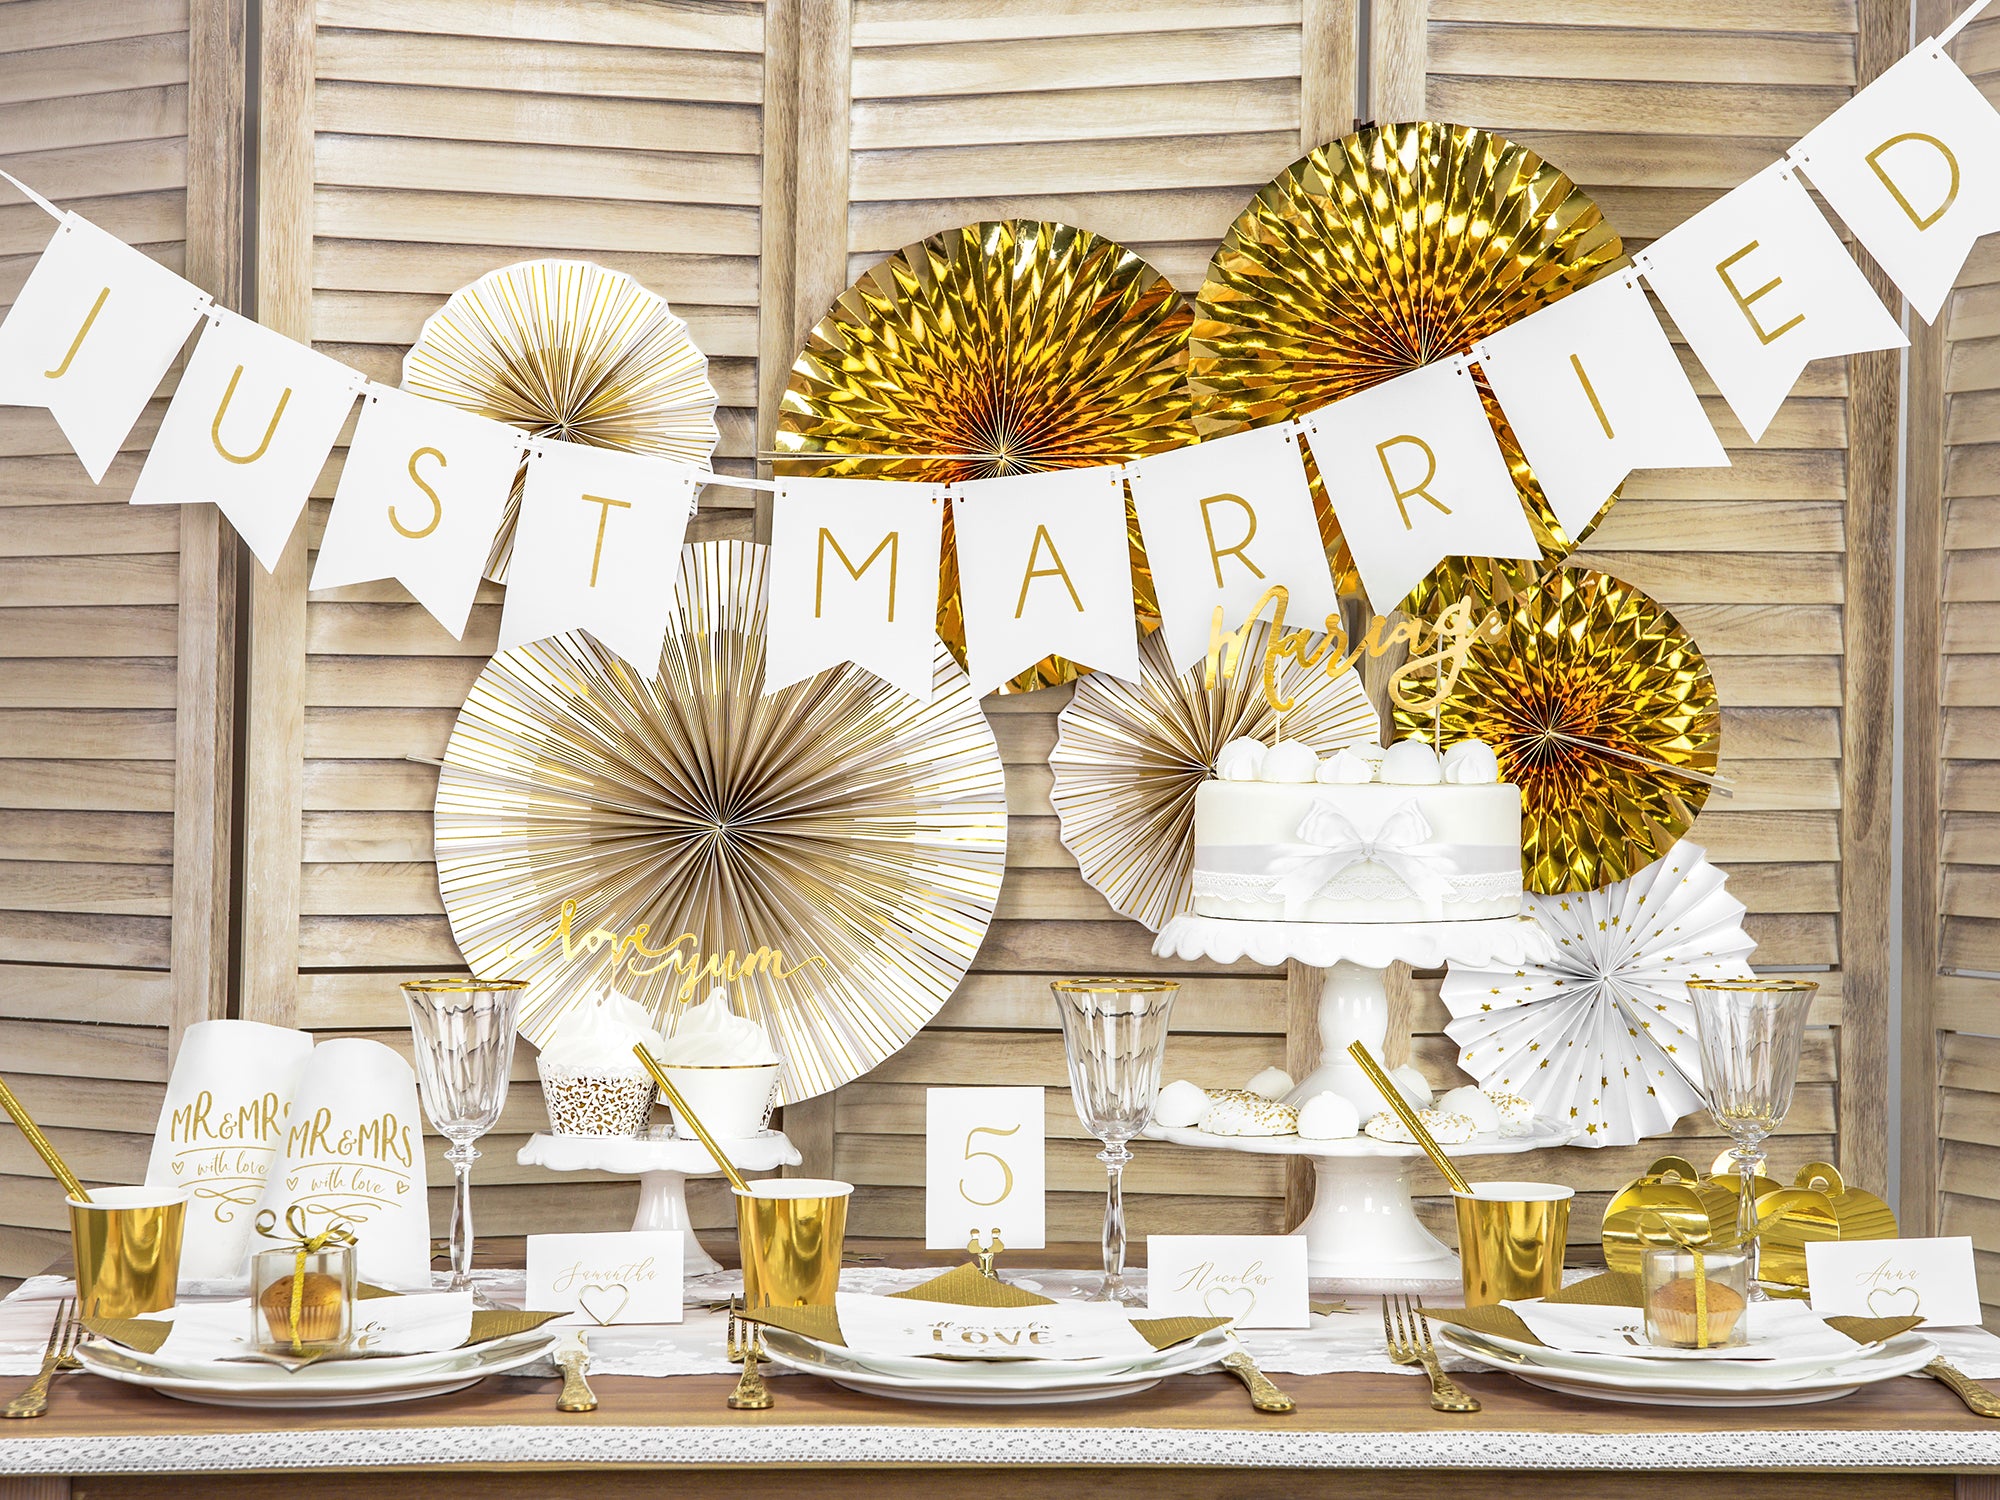 Just Married Bunting White and gold